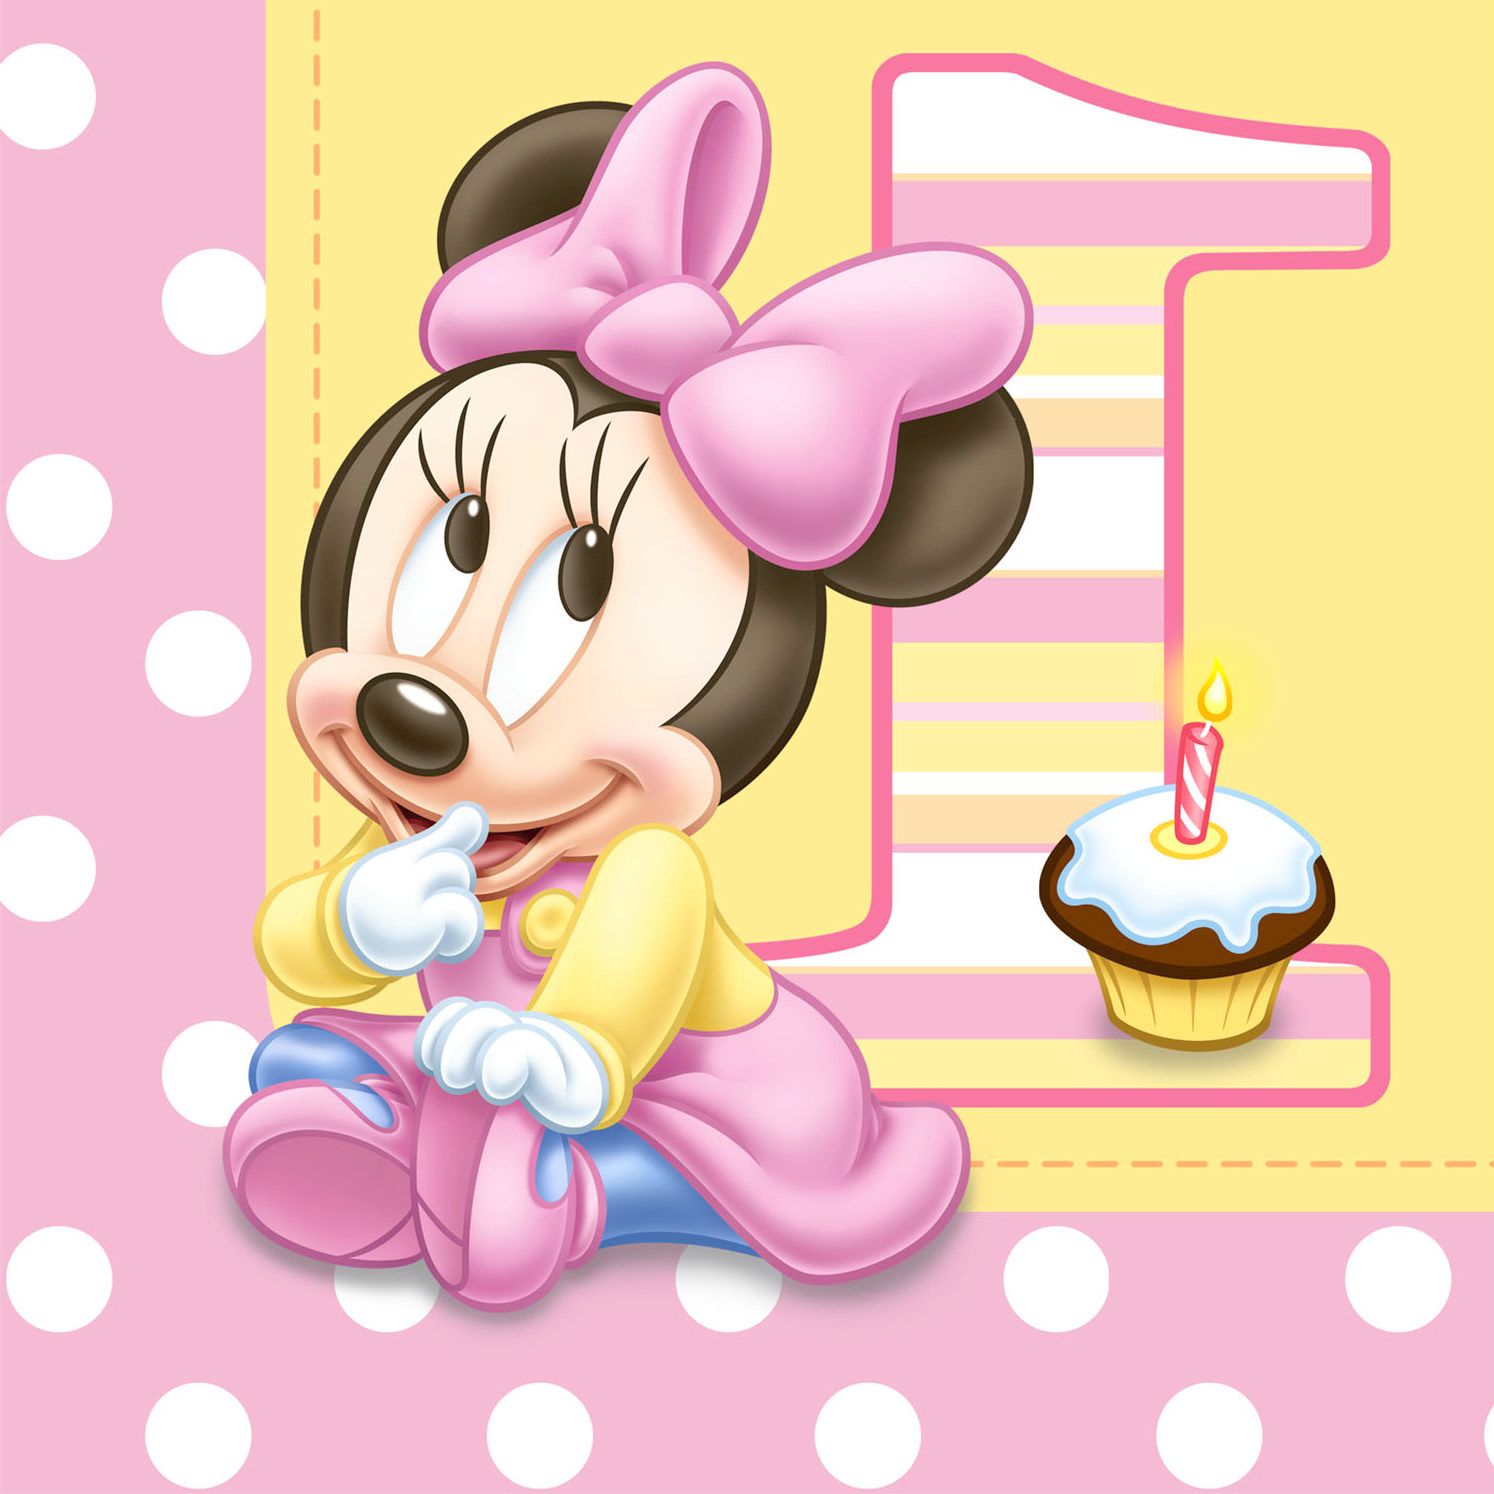 Baby Minnie Mouse Wallpaper HD Wallpaper